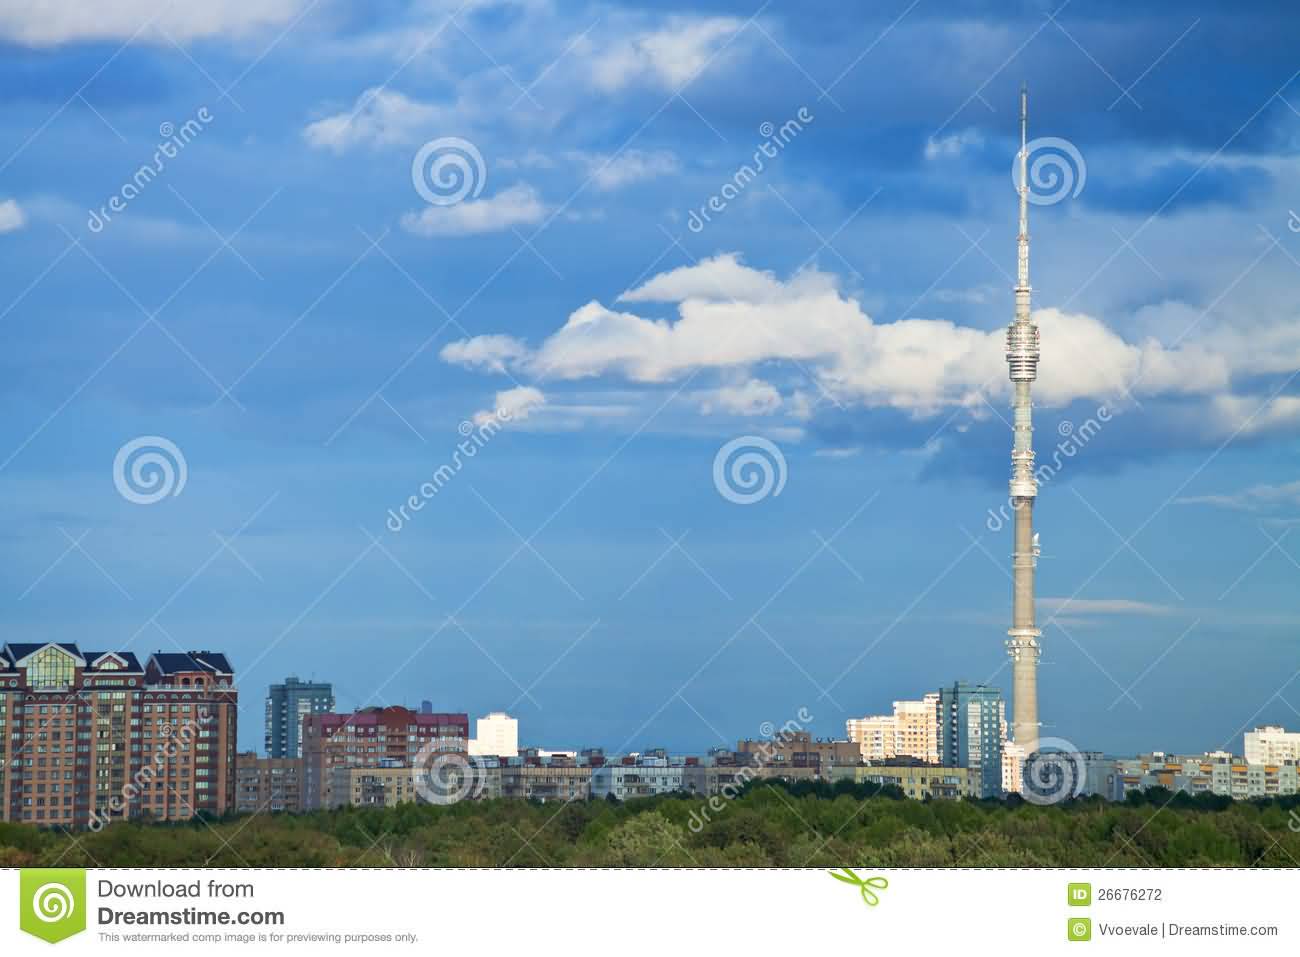 Ostankino Tower In Moscow